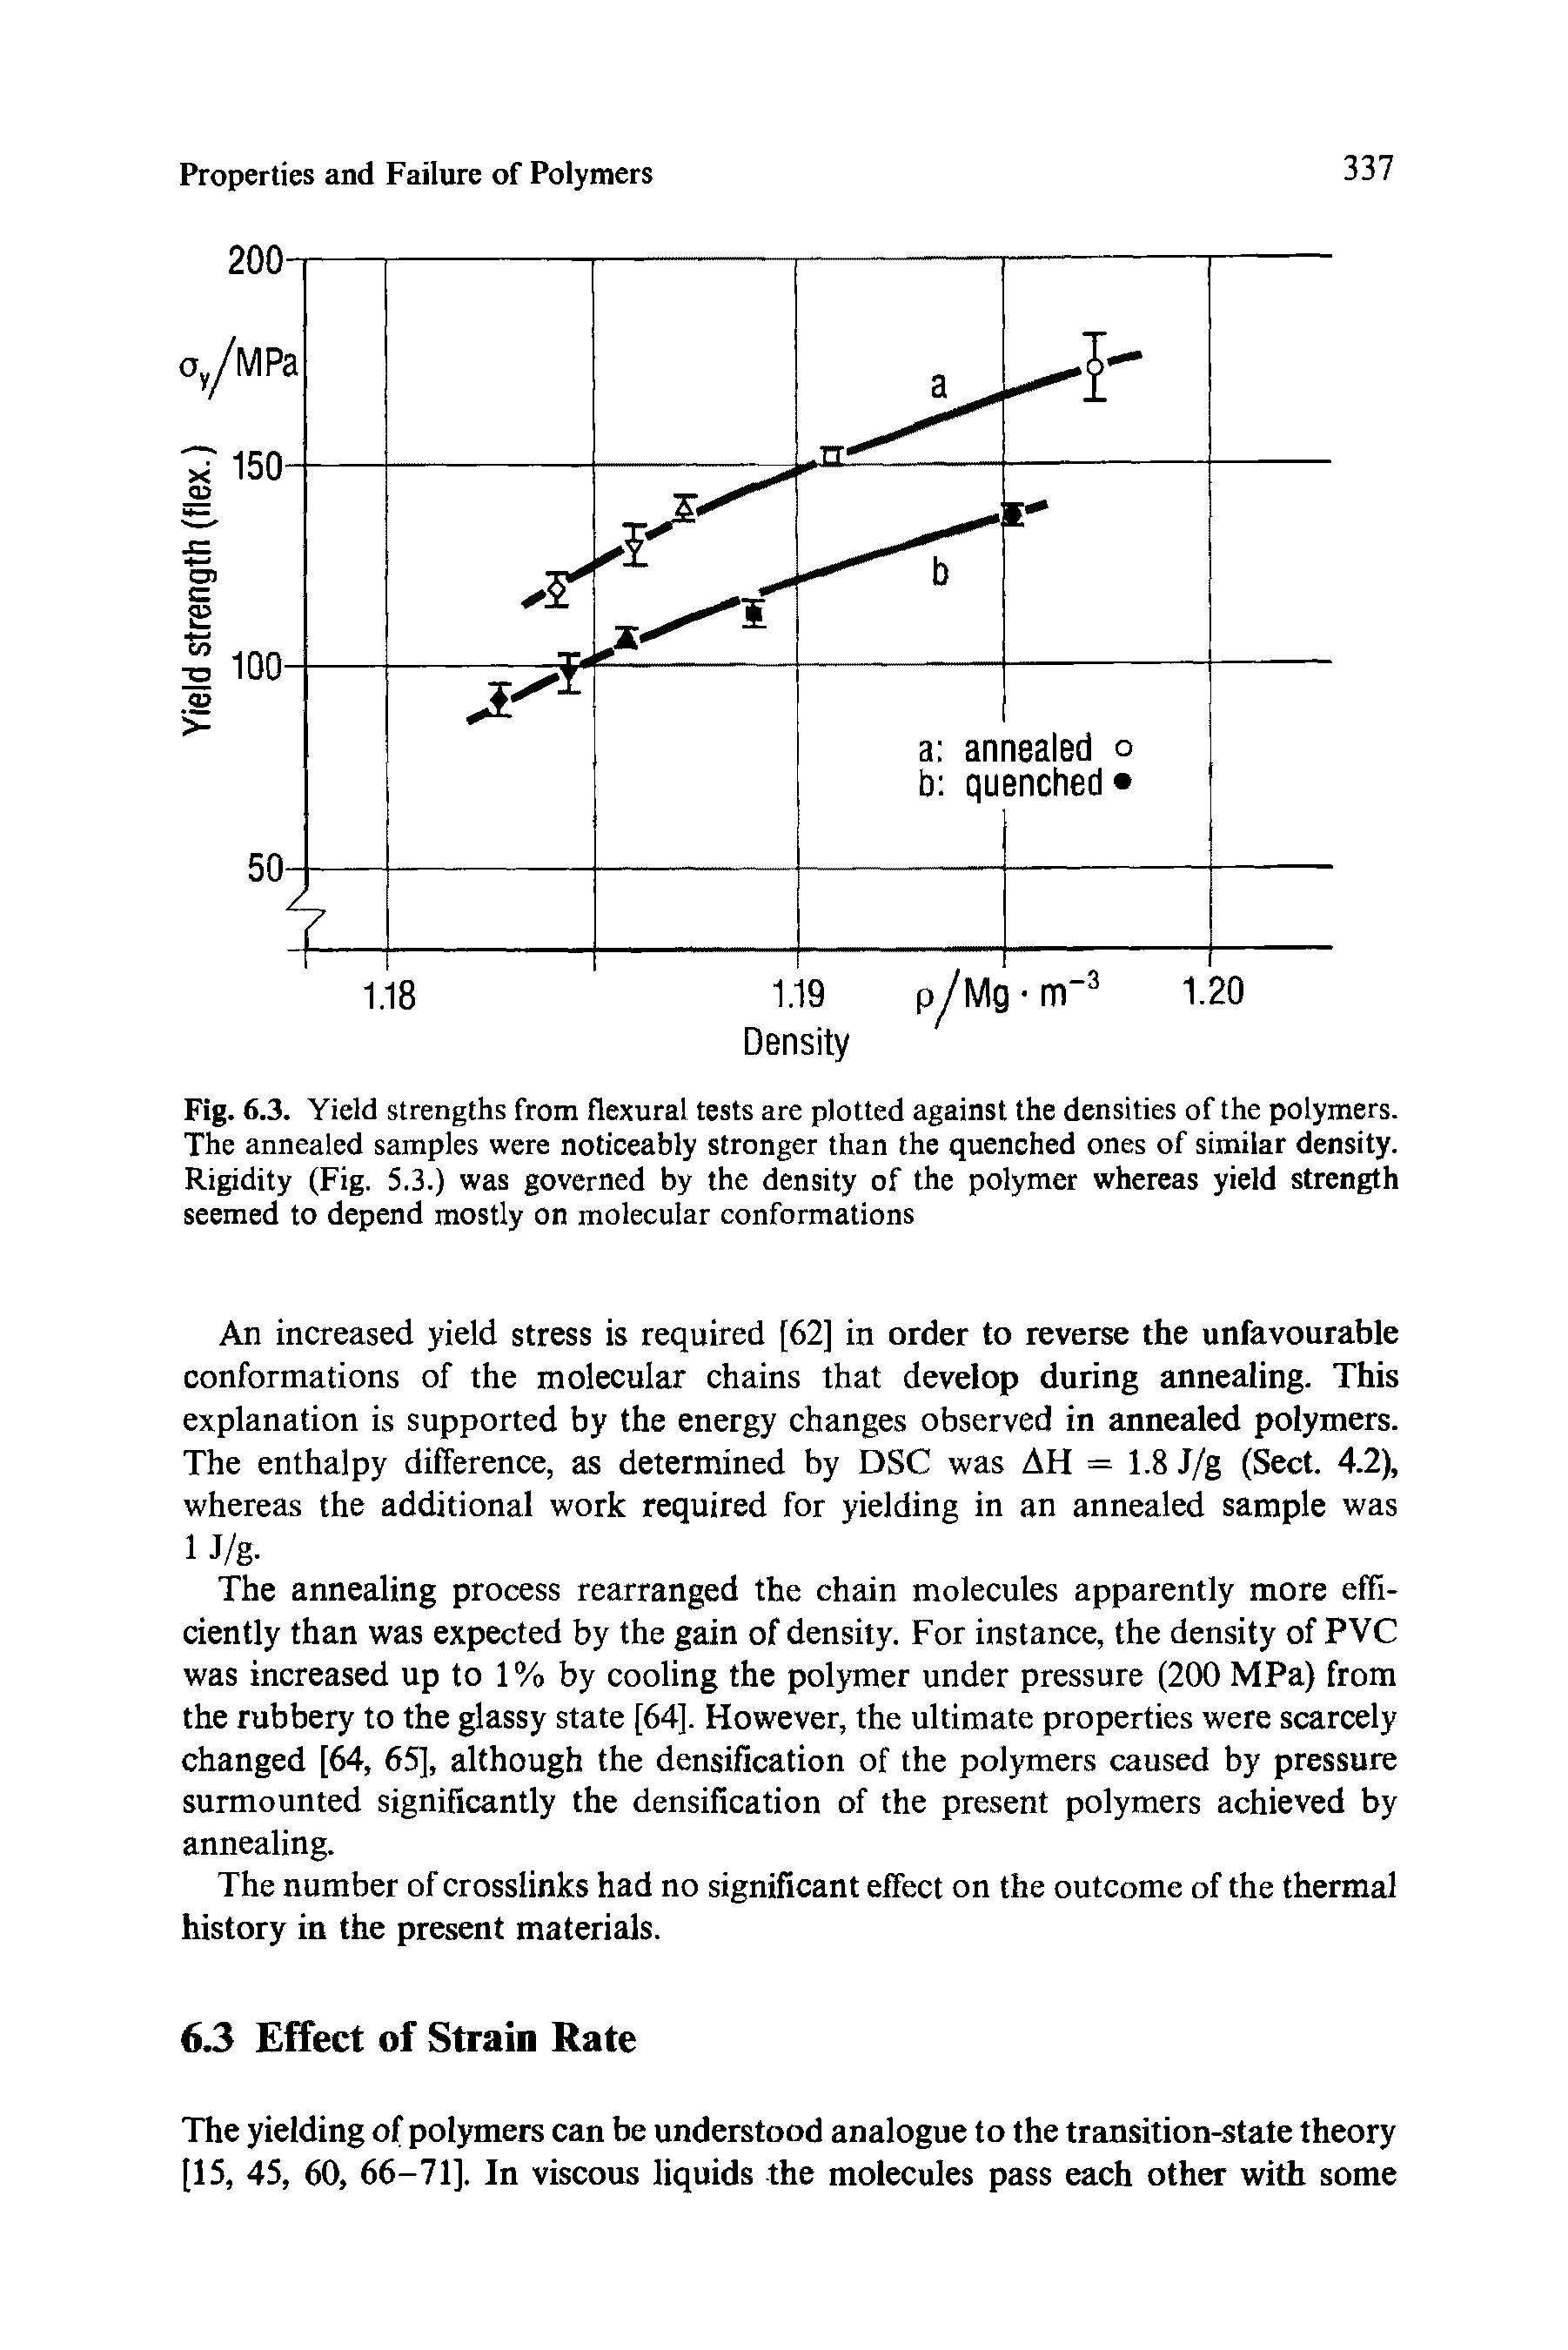 Fig. 6.3. Yield strengths from flexural tests are plotted against the densities of the polymers. The annealed samples were noticeably stronger than the quenched ones of similar density. Rigidity (Fig. 5.3.) was governed by the density of the polymer whereas yield strength seemed to depend mostly on molecular conformations...